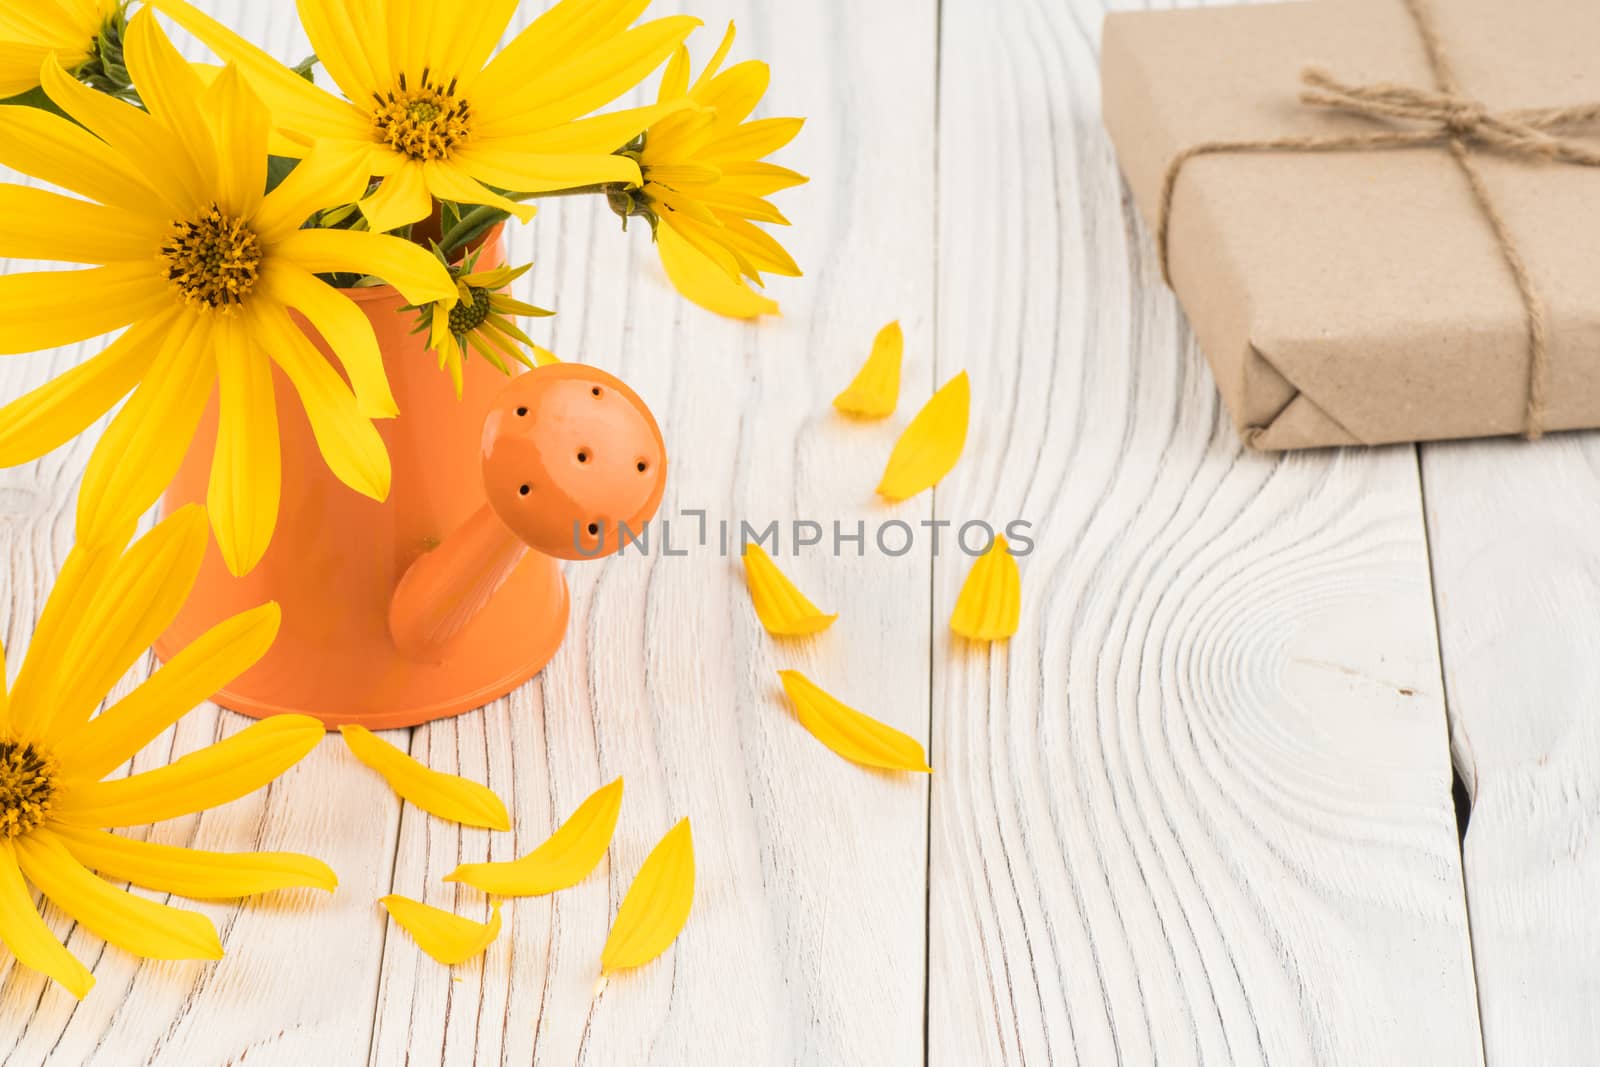 Wild flowers in a watering can with a gift box on a wooden table by DGolbay